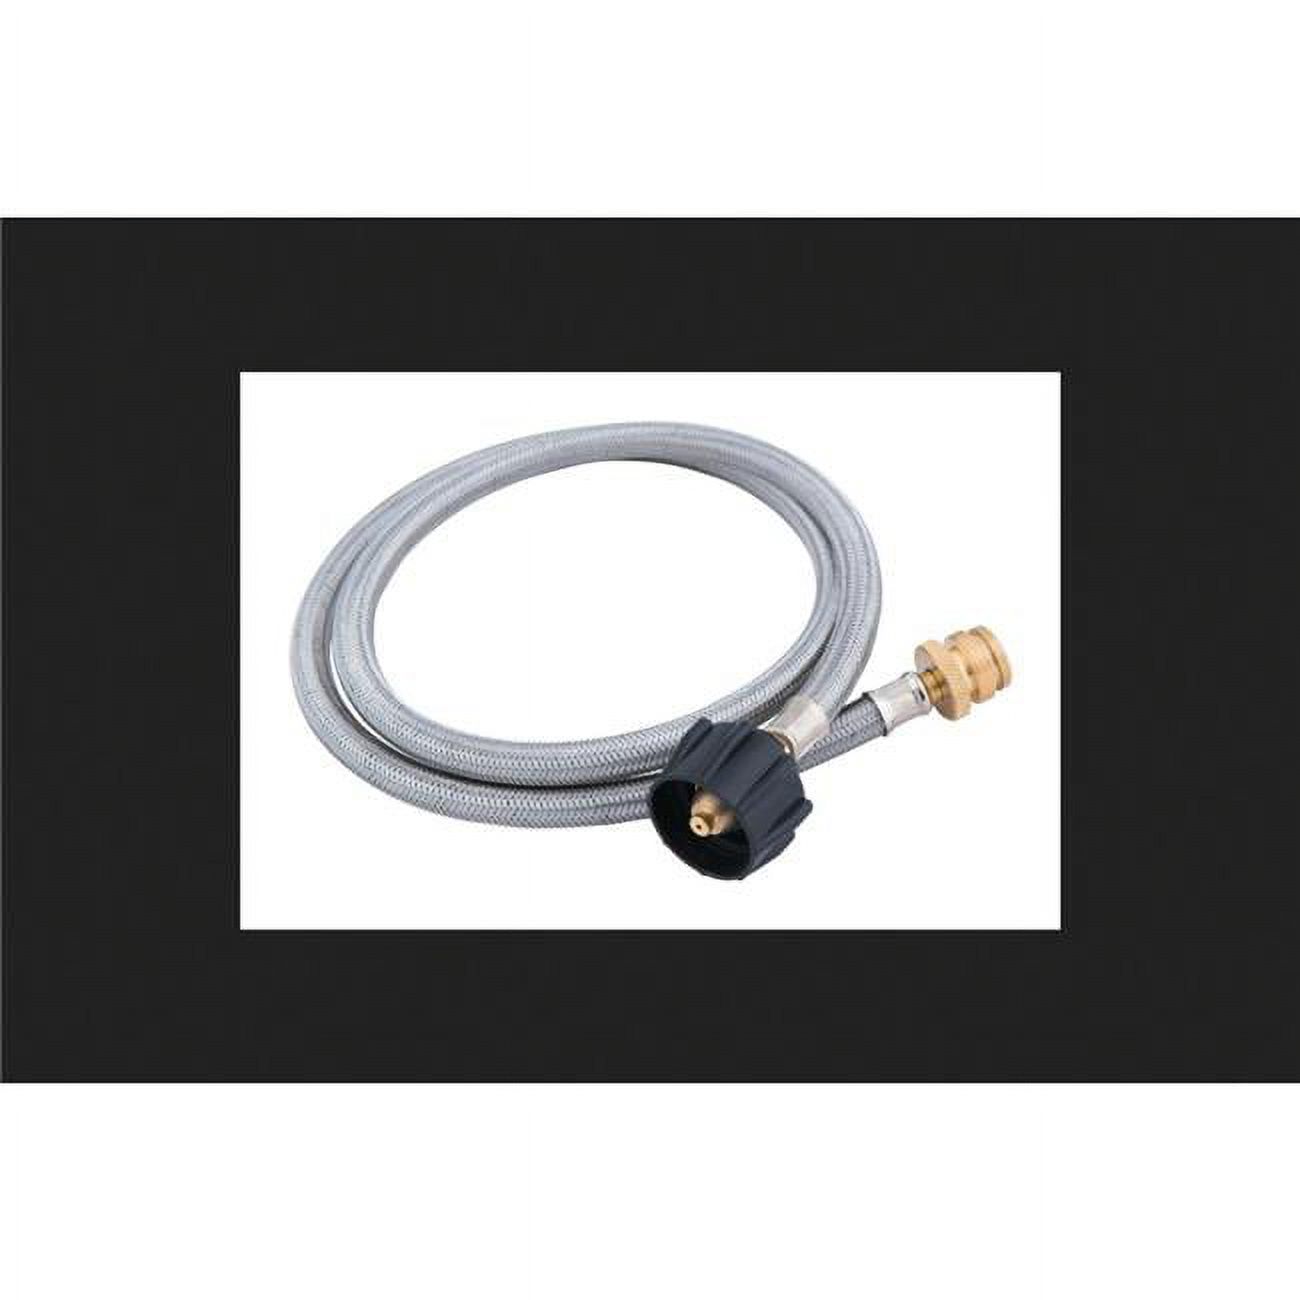 Grillmark 68004 Gas Line Hose and Adapter, 46" - image 1 of 2